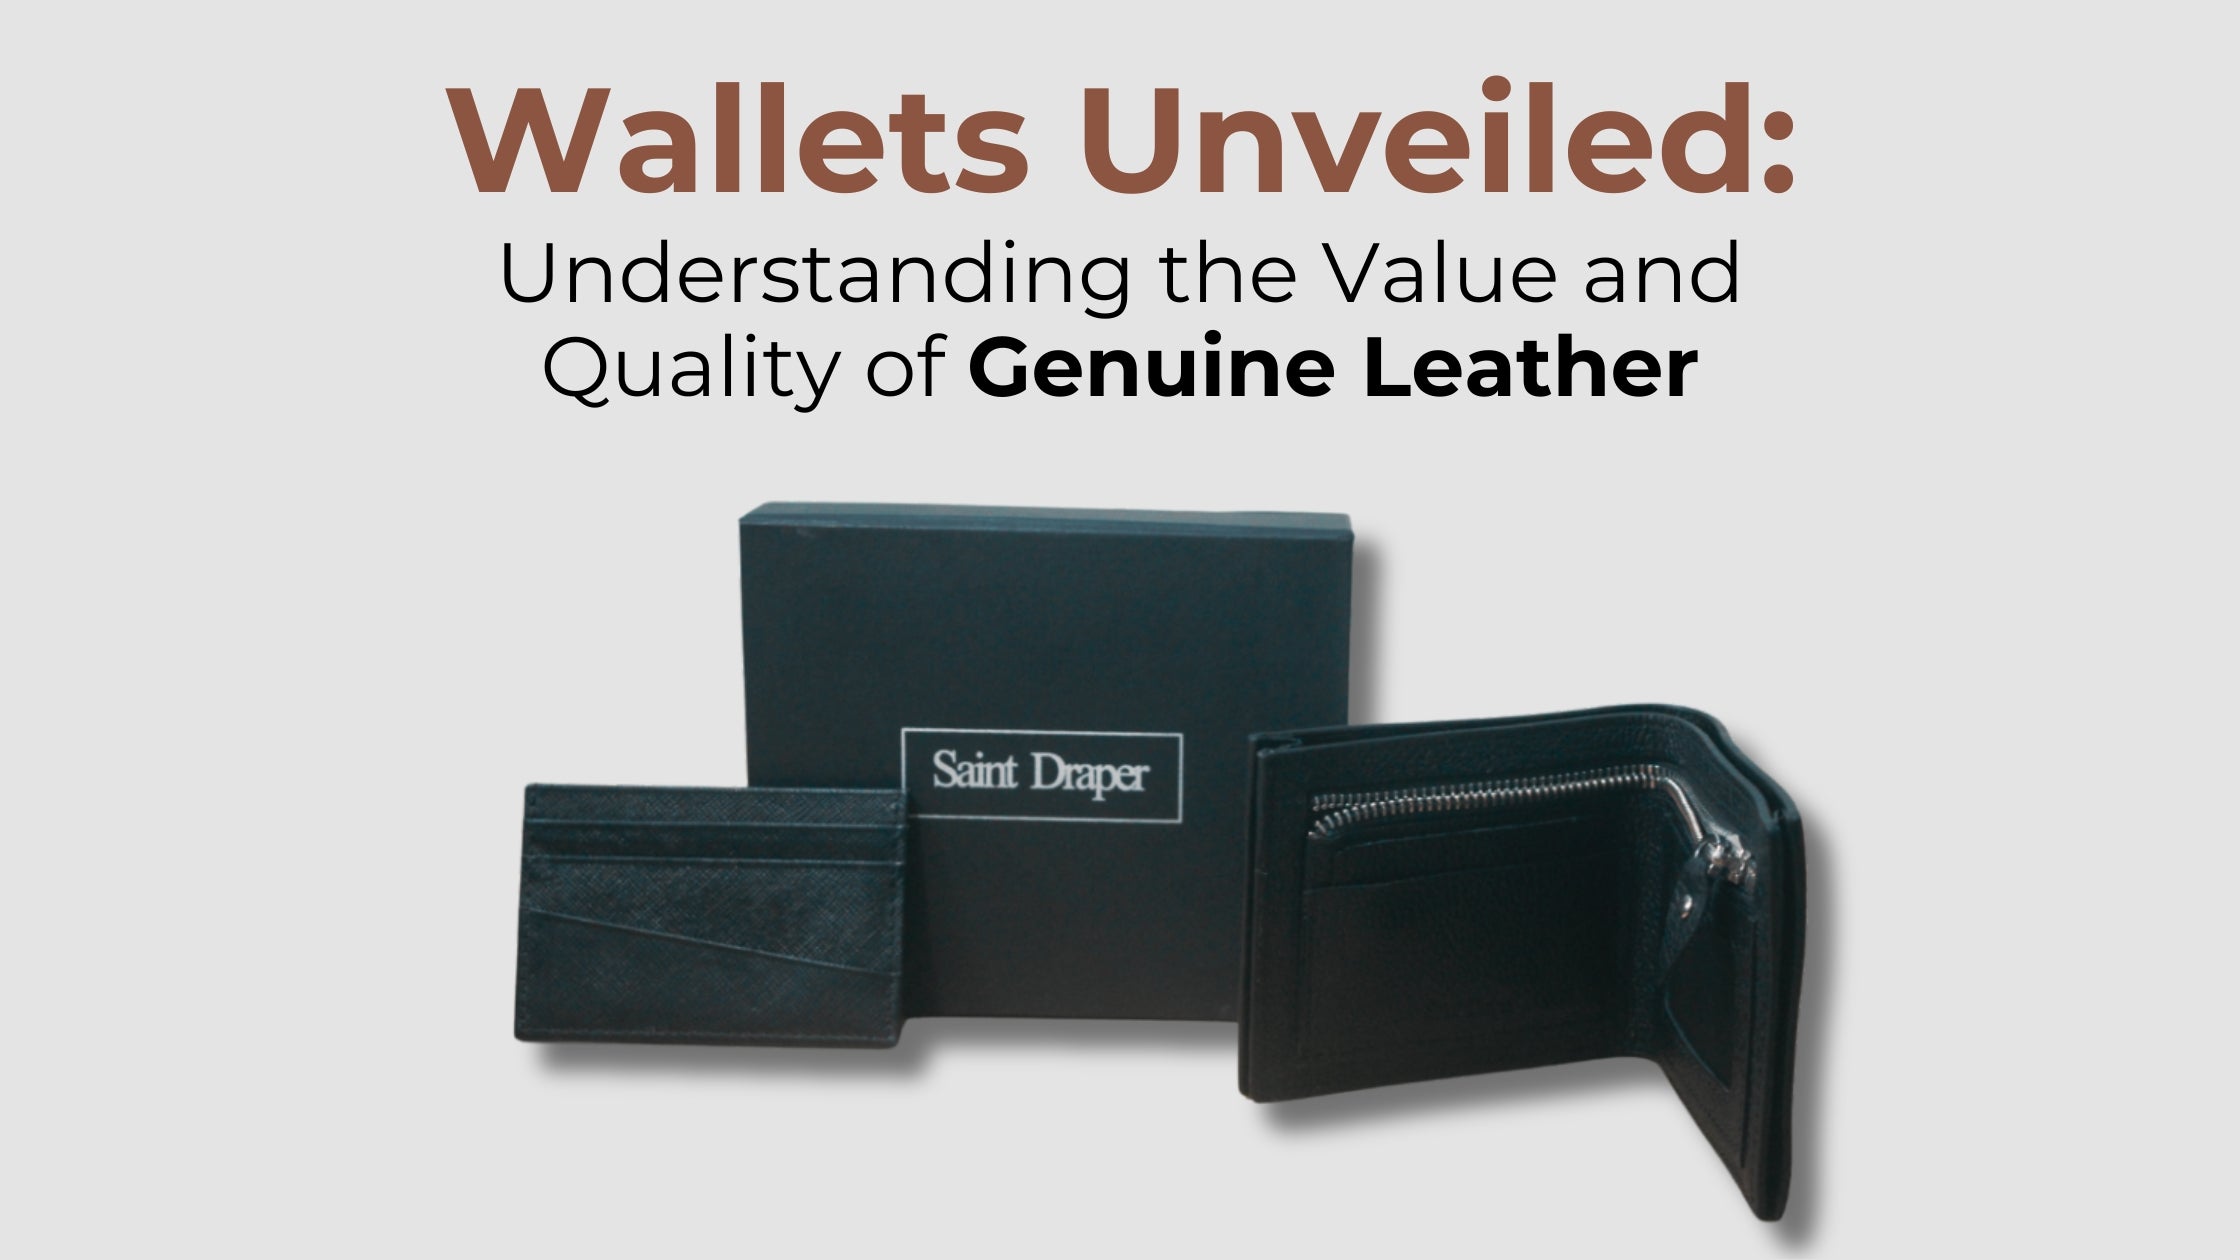 Wallets Unveiled: Understanding the Value and Quality of Genuine Leather